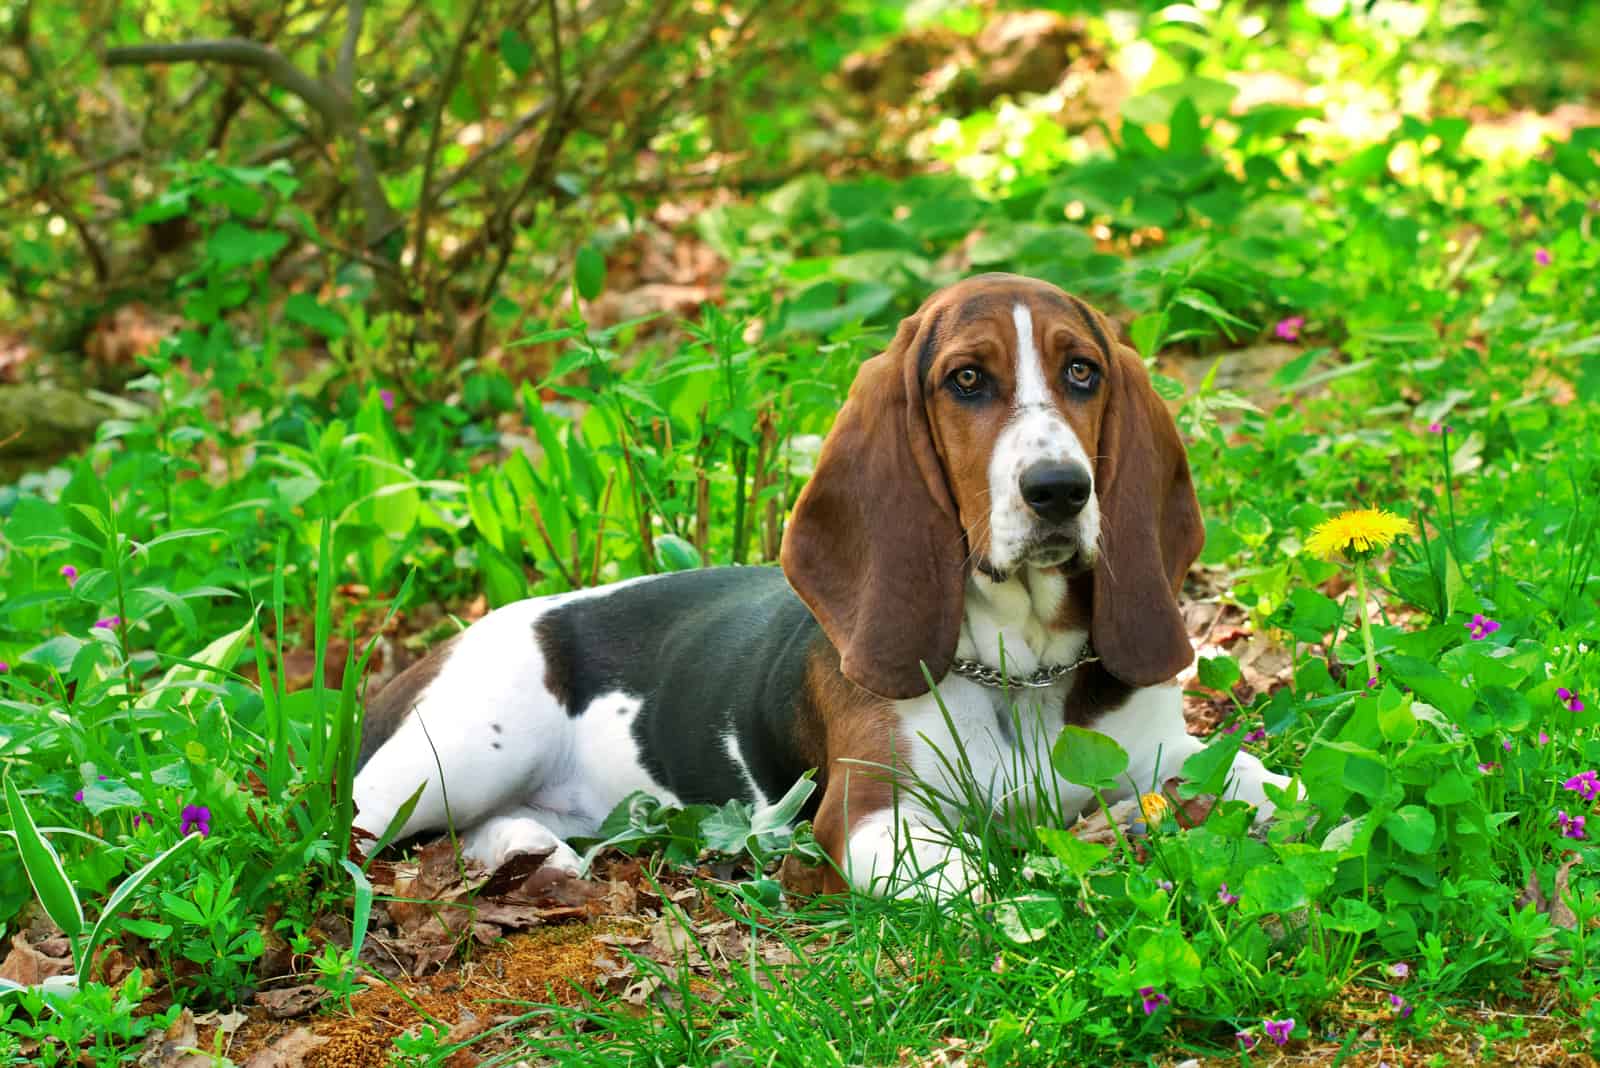 Basset Hound lies on the green grass and looks ahead